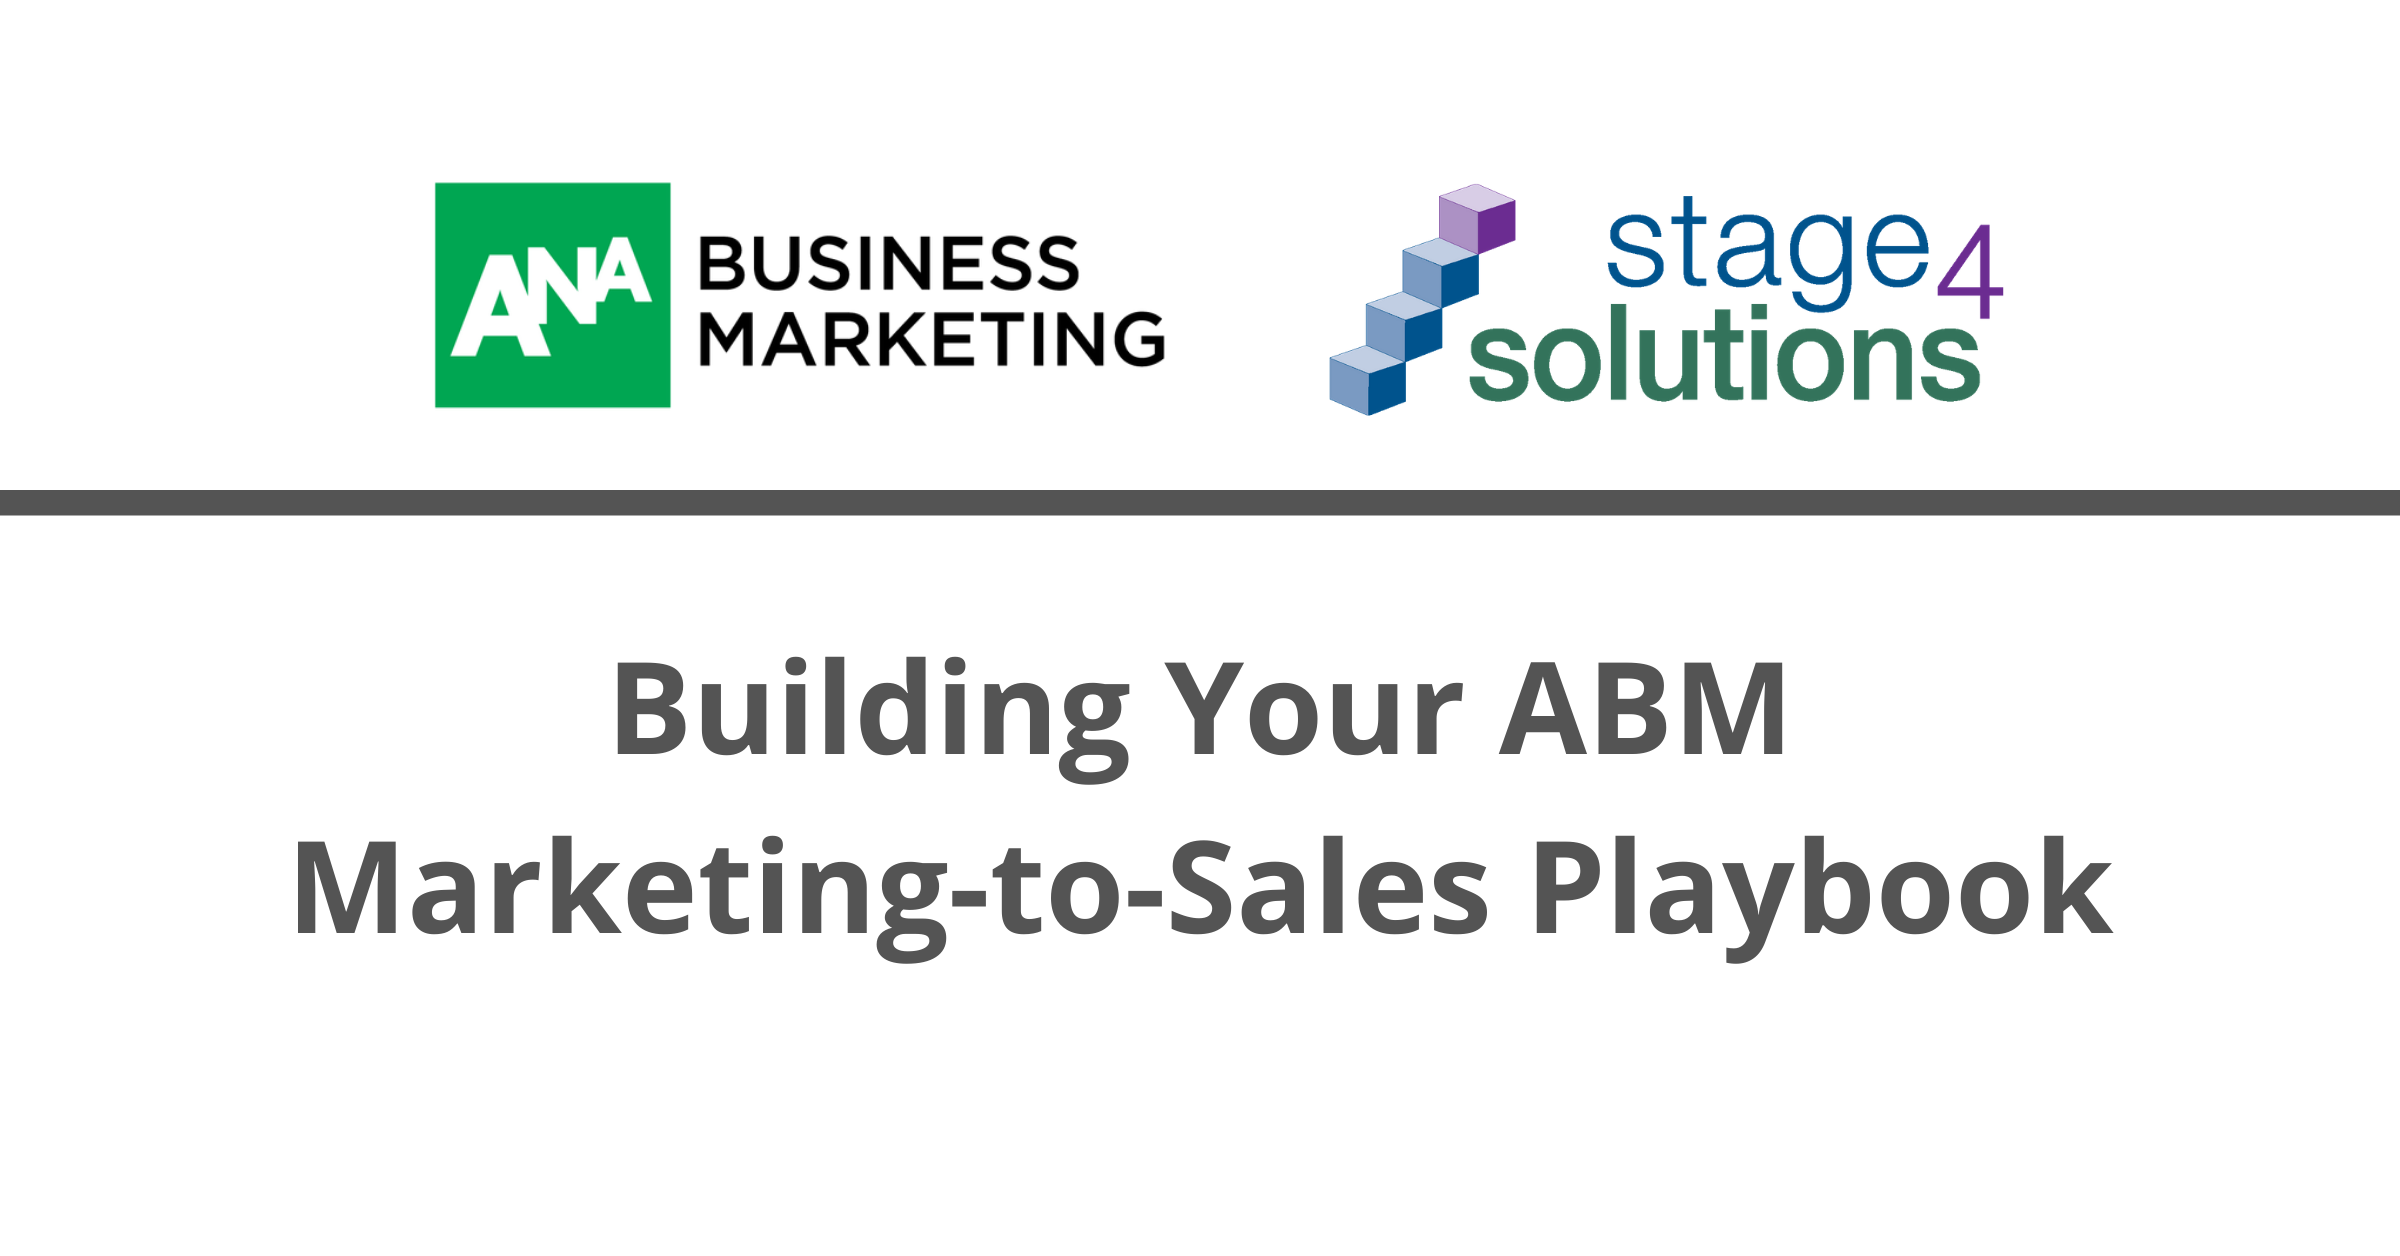 Building Your ABM Marketing-to-Sales Playbook